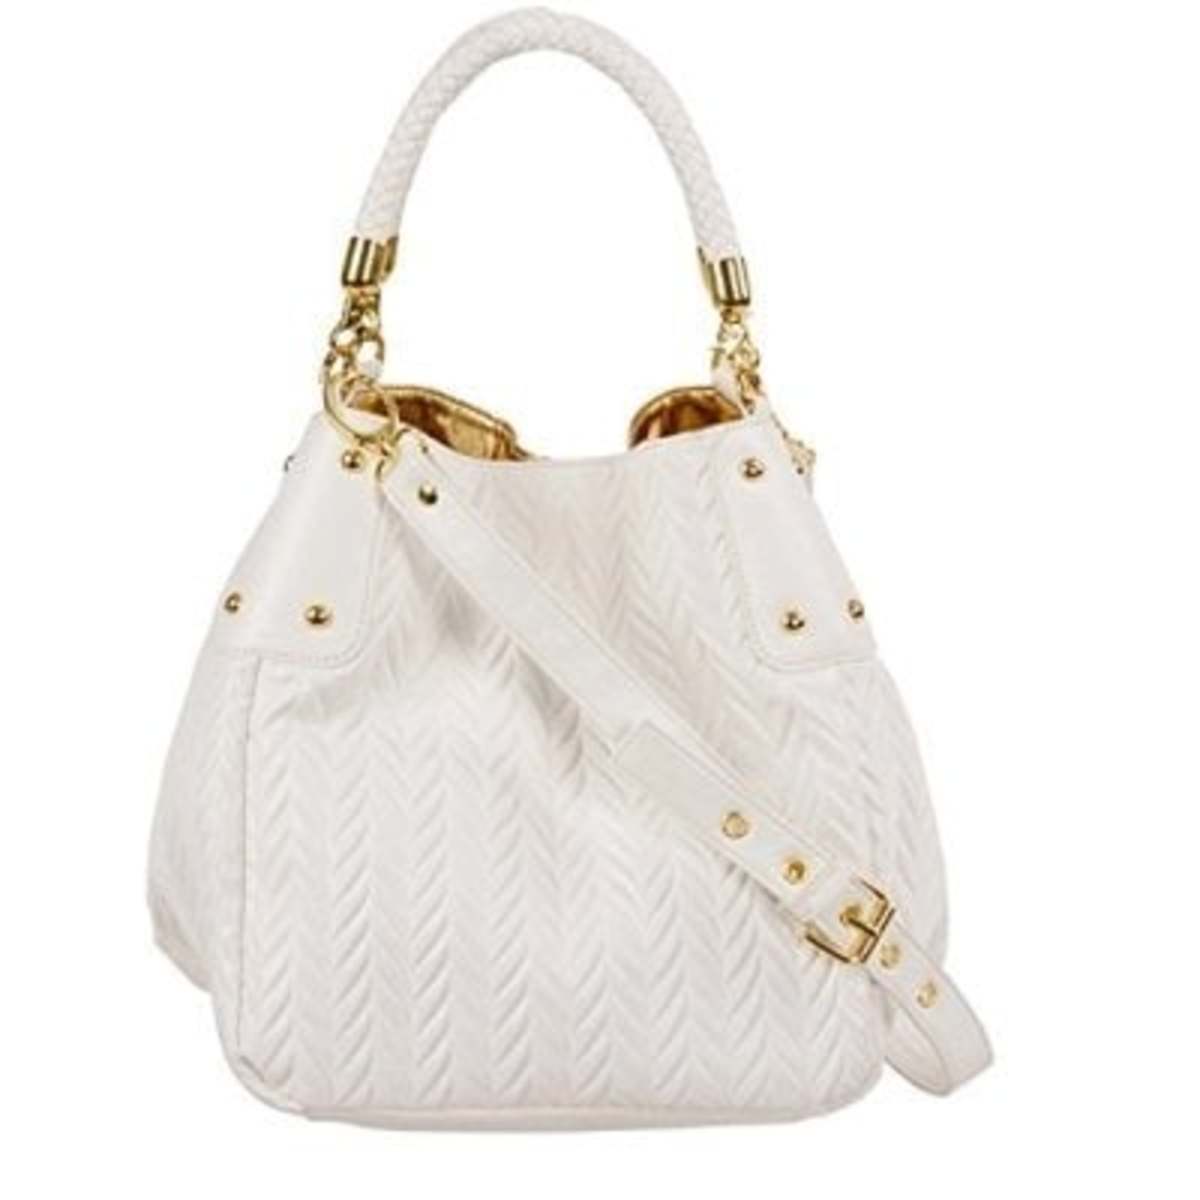 top 10 most adorable and ergonomic handbags for women